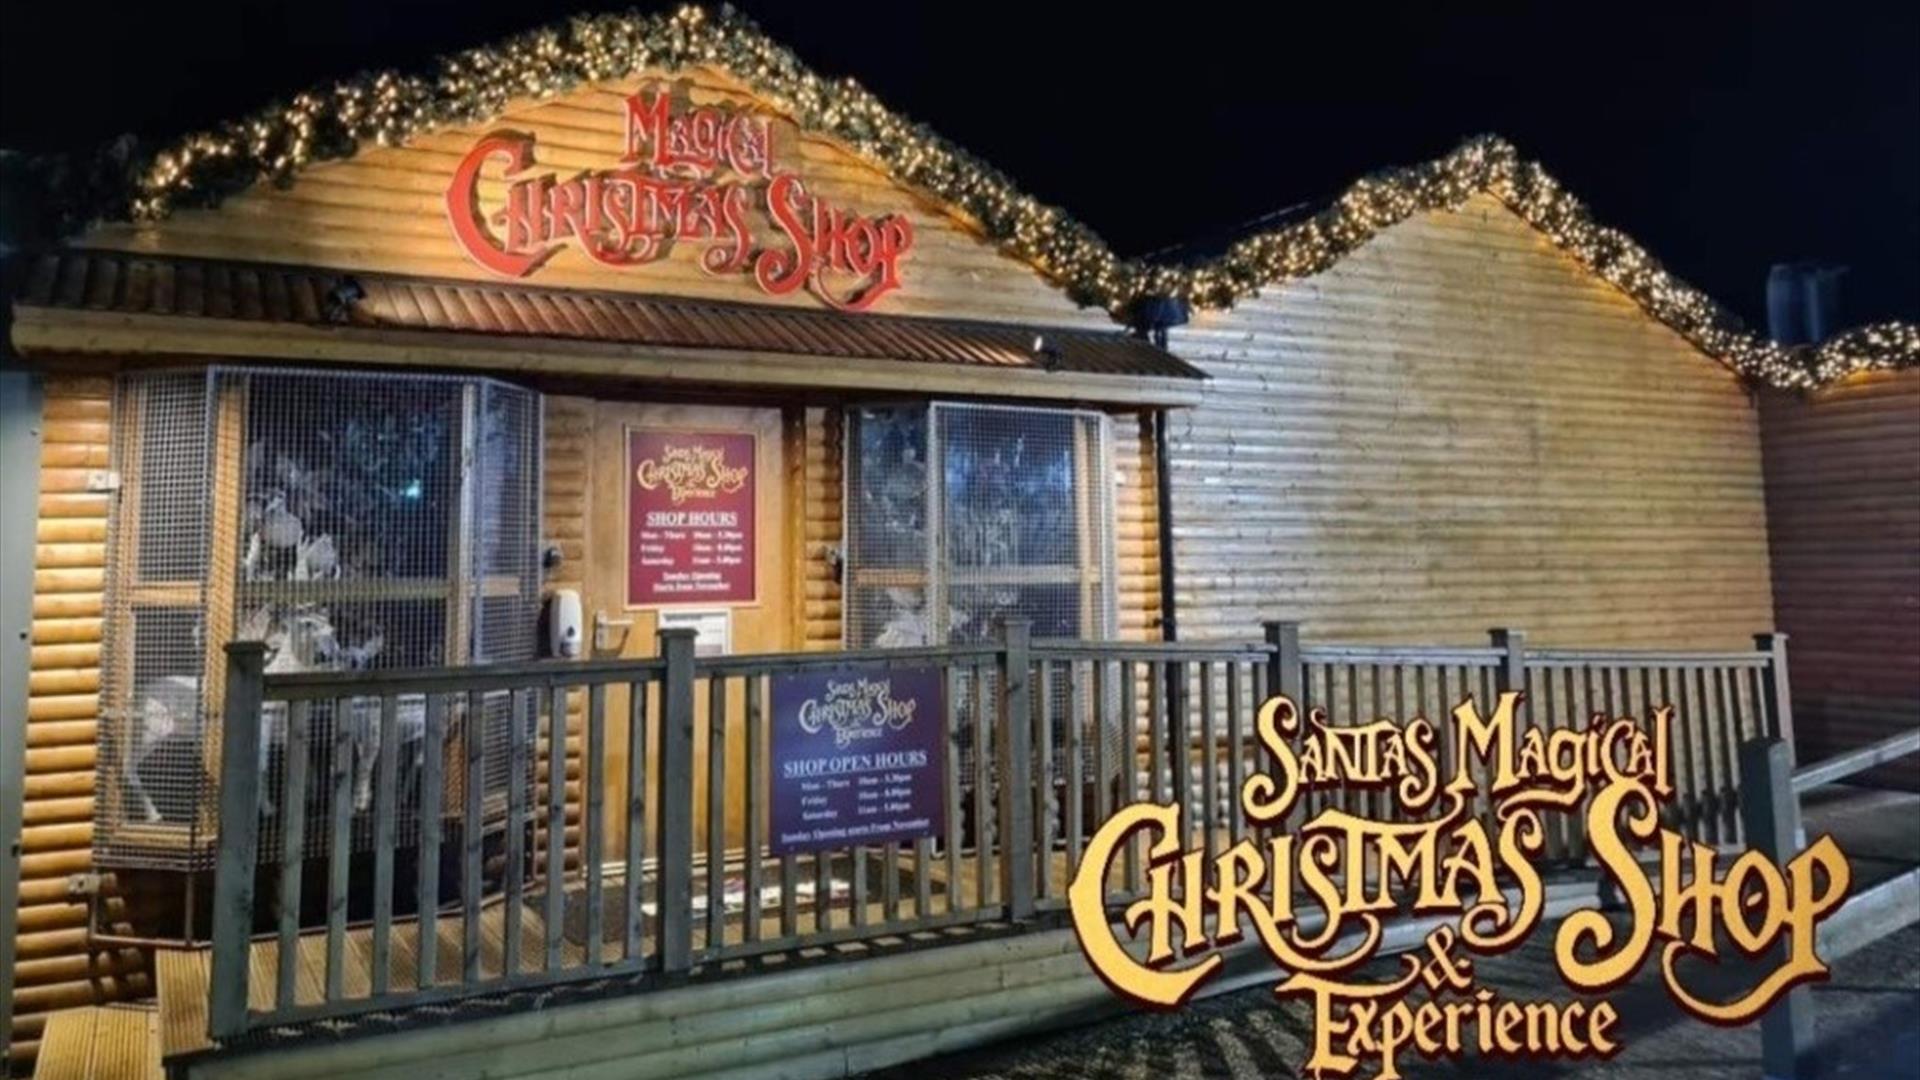 Image of the Log cabin of the Christmas shop